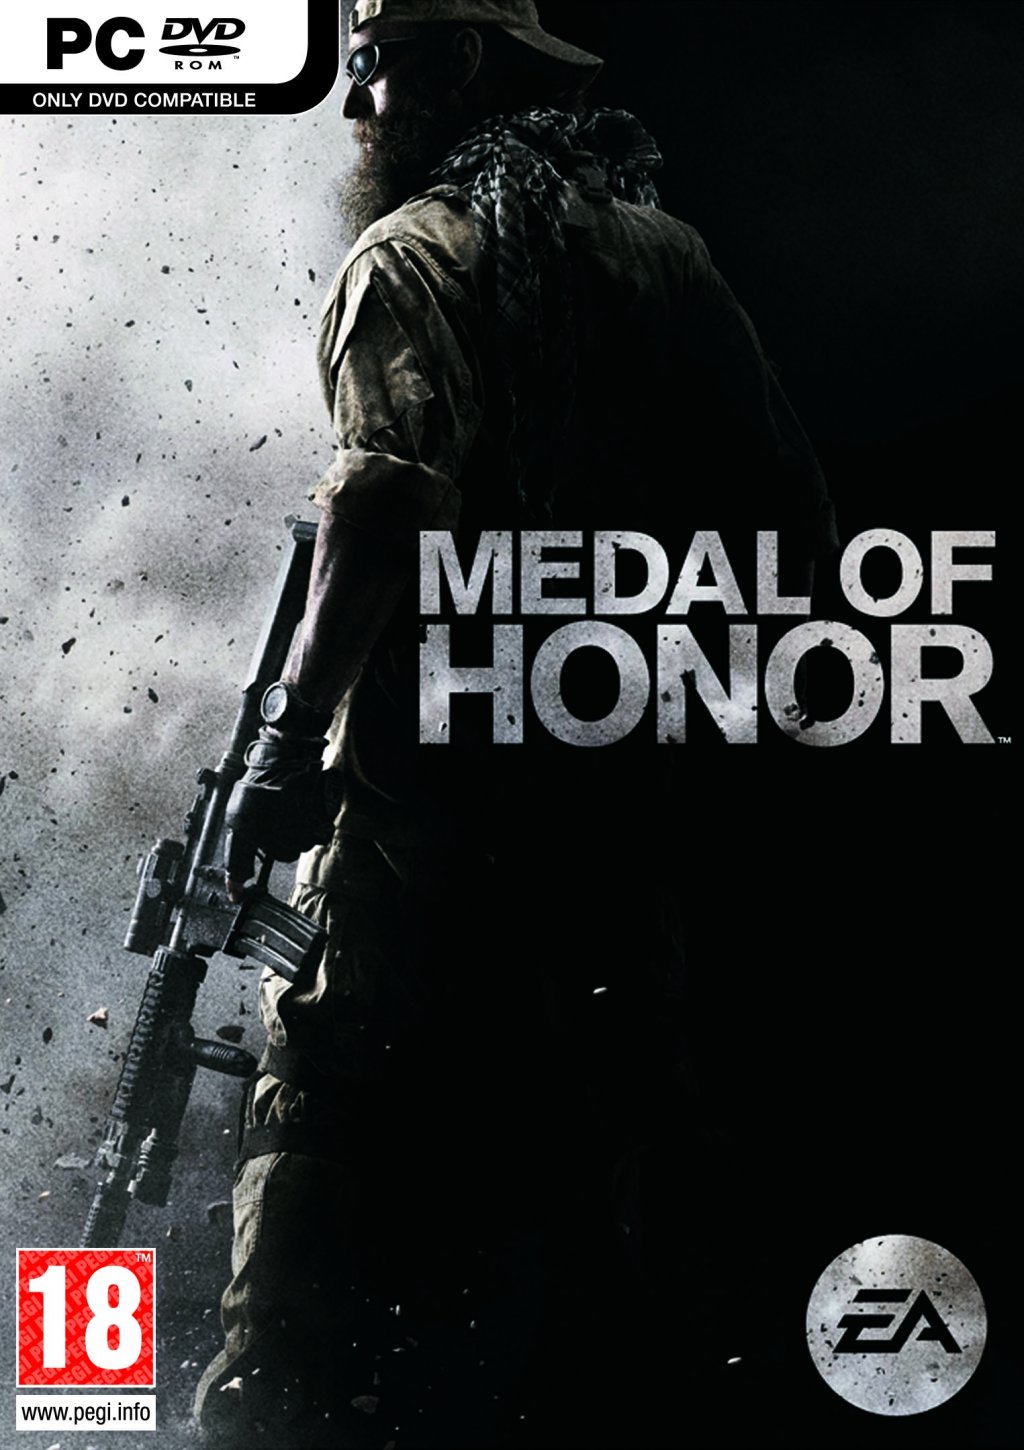 Medal of Honor Boxart PC